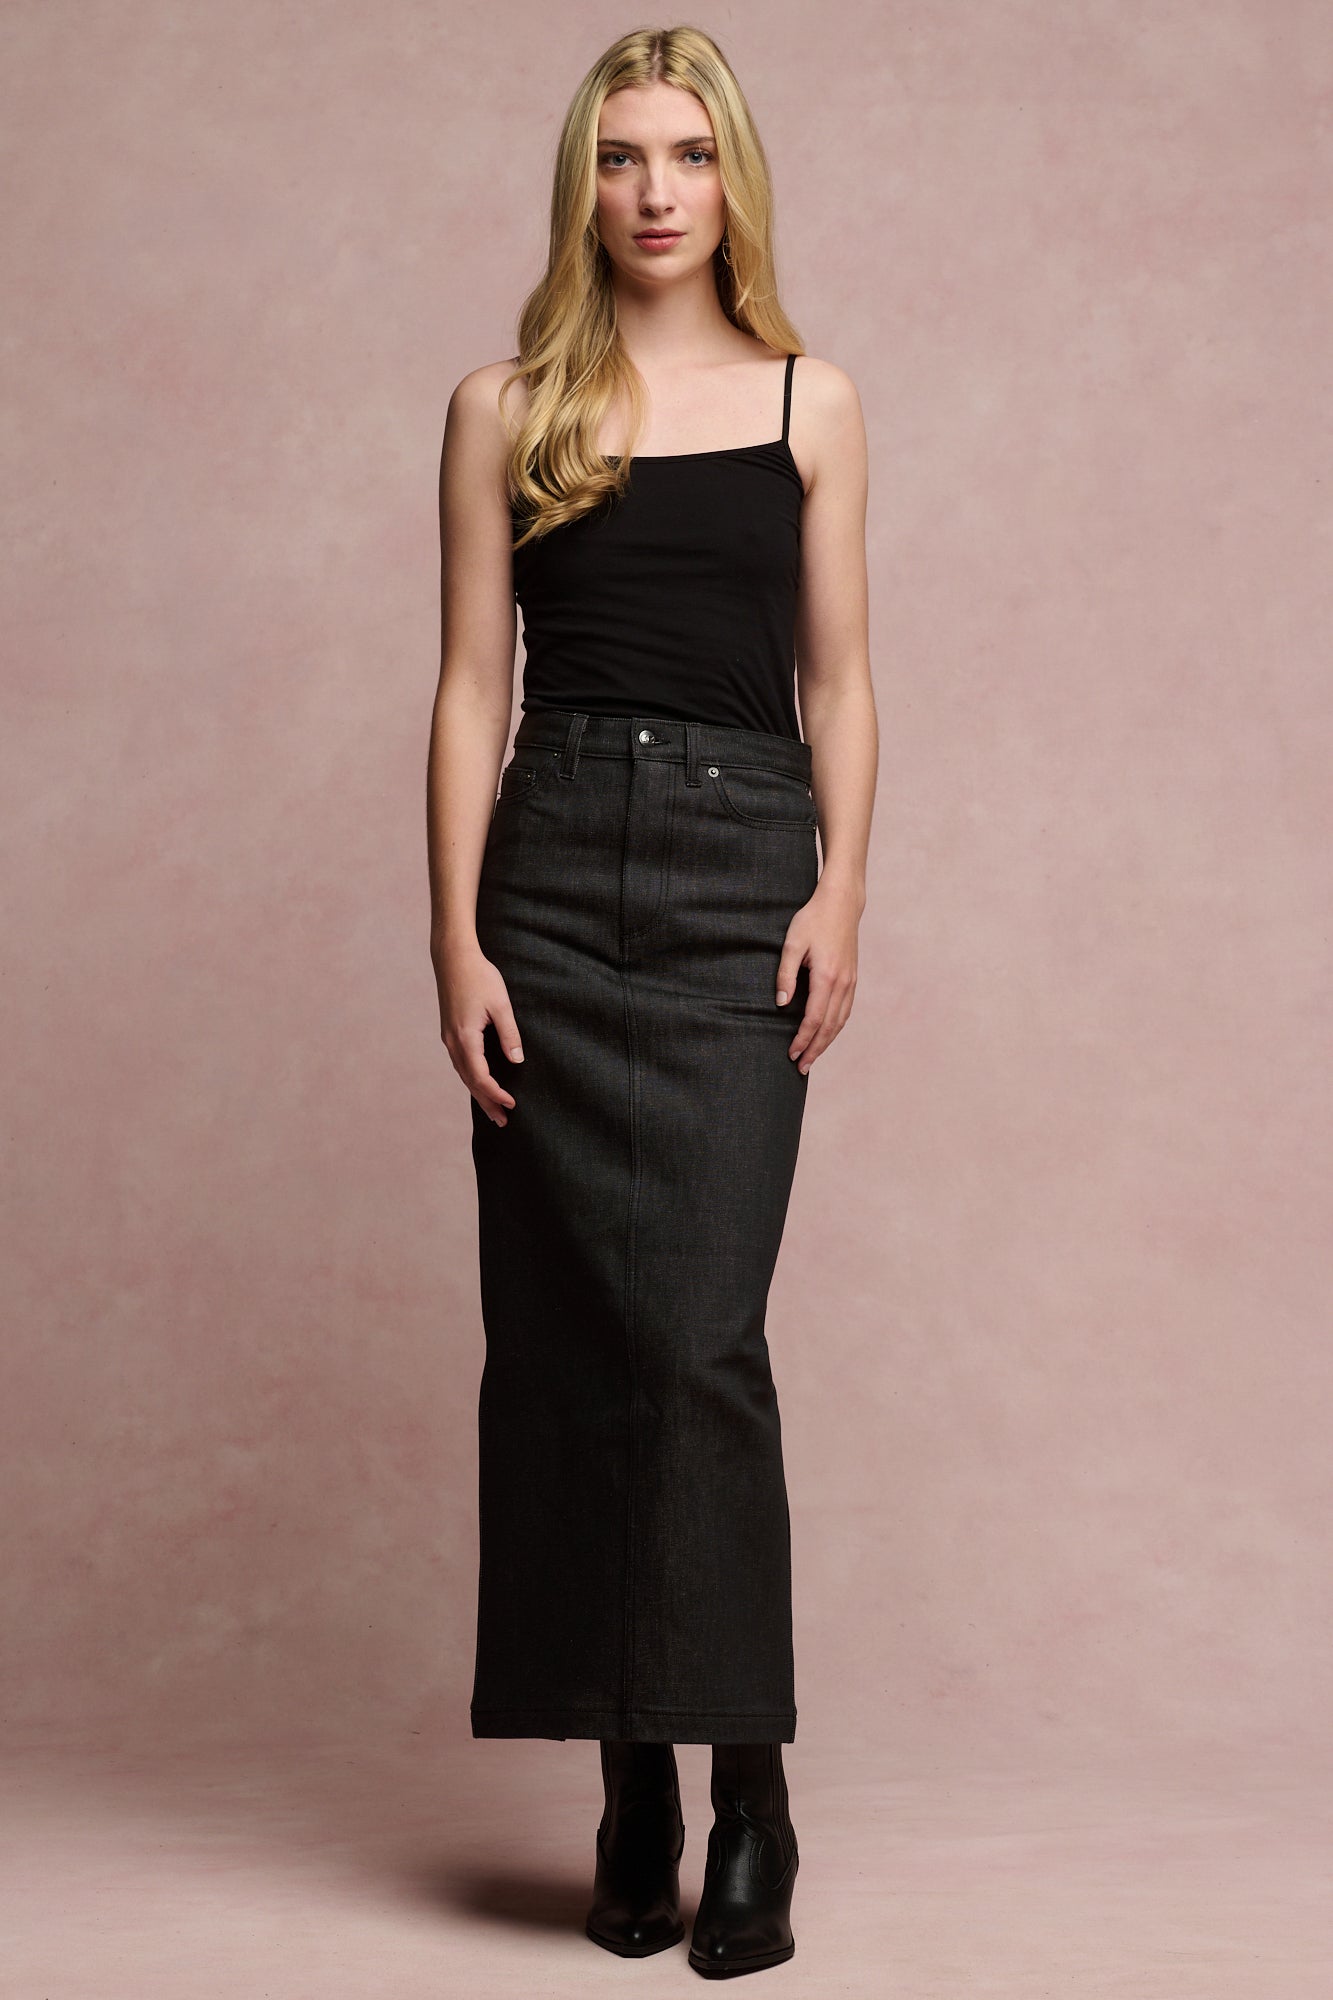 Blonde female wearing Frankie denim maxi skirt in black with black camisole tucked in paired with black boots